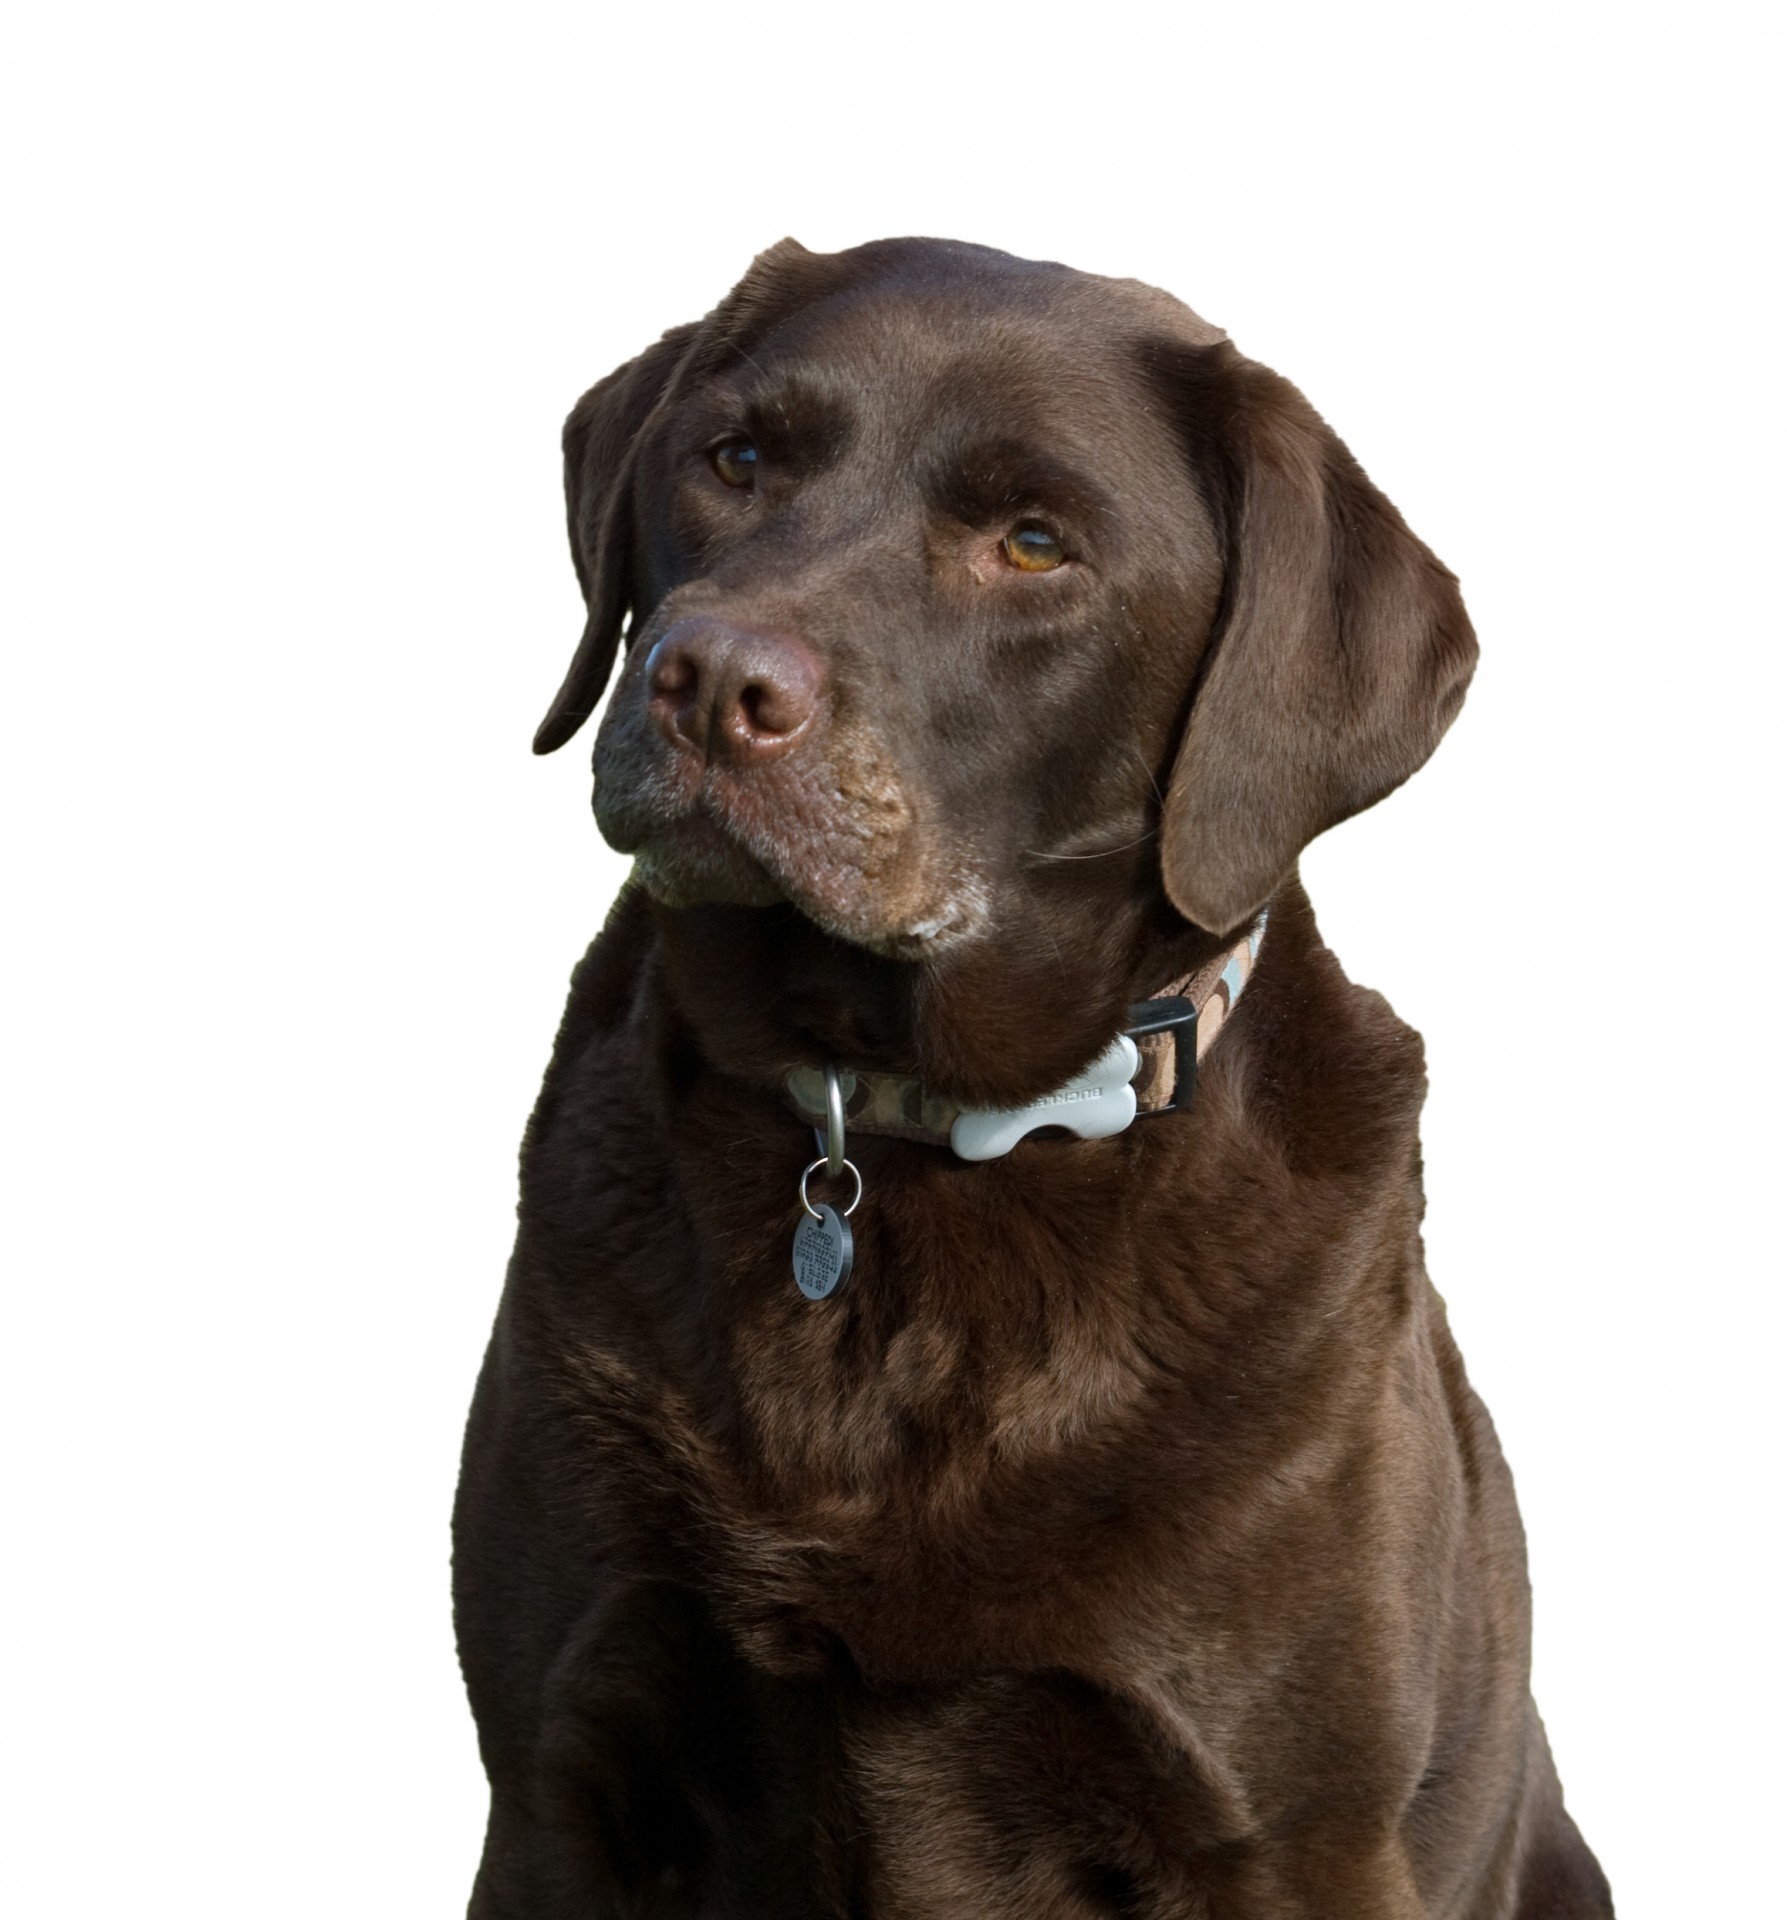 Download free photo of Dog,labrador,chocolate,brown,isolated - from needpix.com